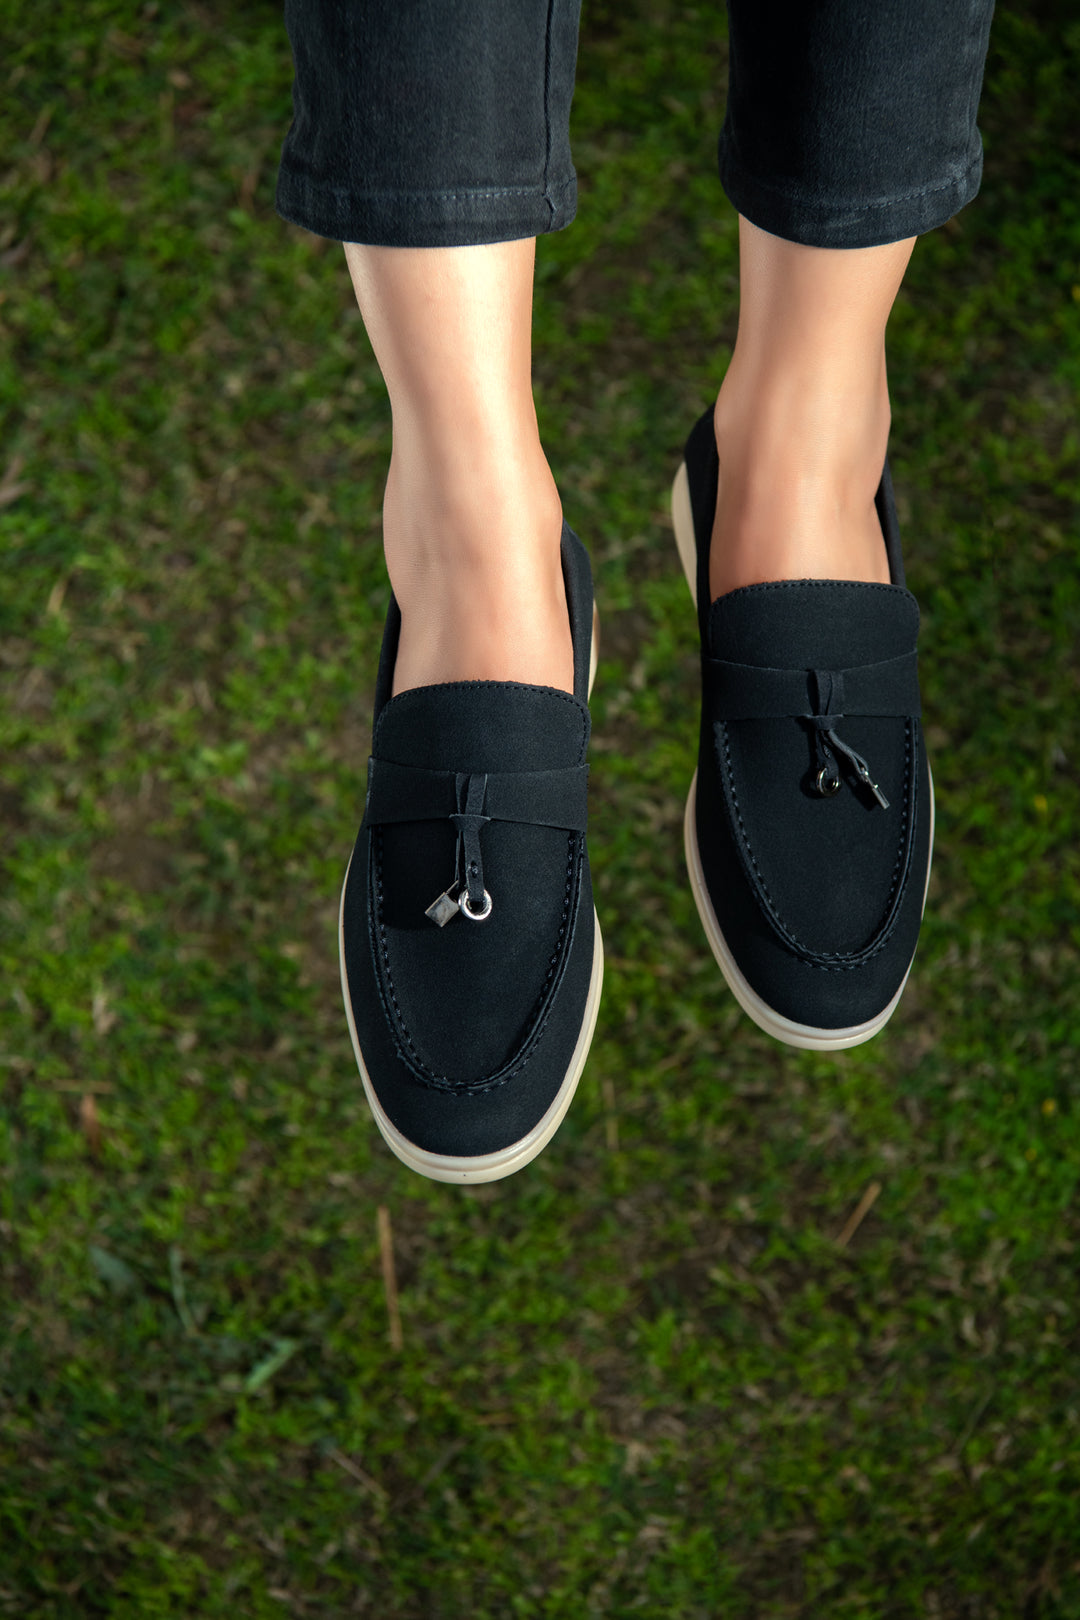 CHARCOAL GRAY SOFT SLIP SUEDE LOAFERS